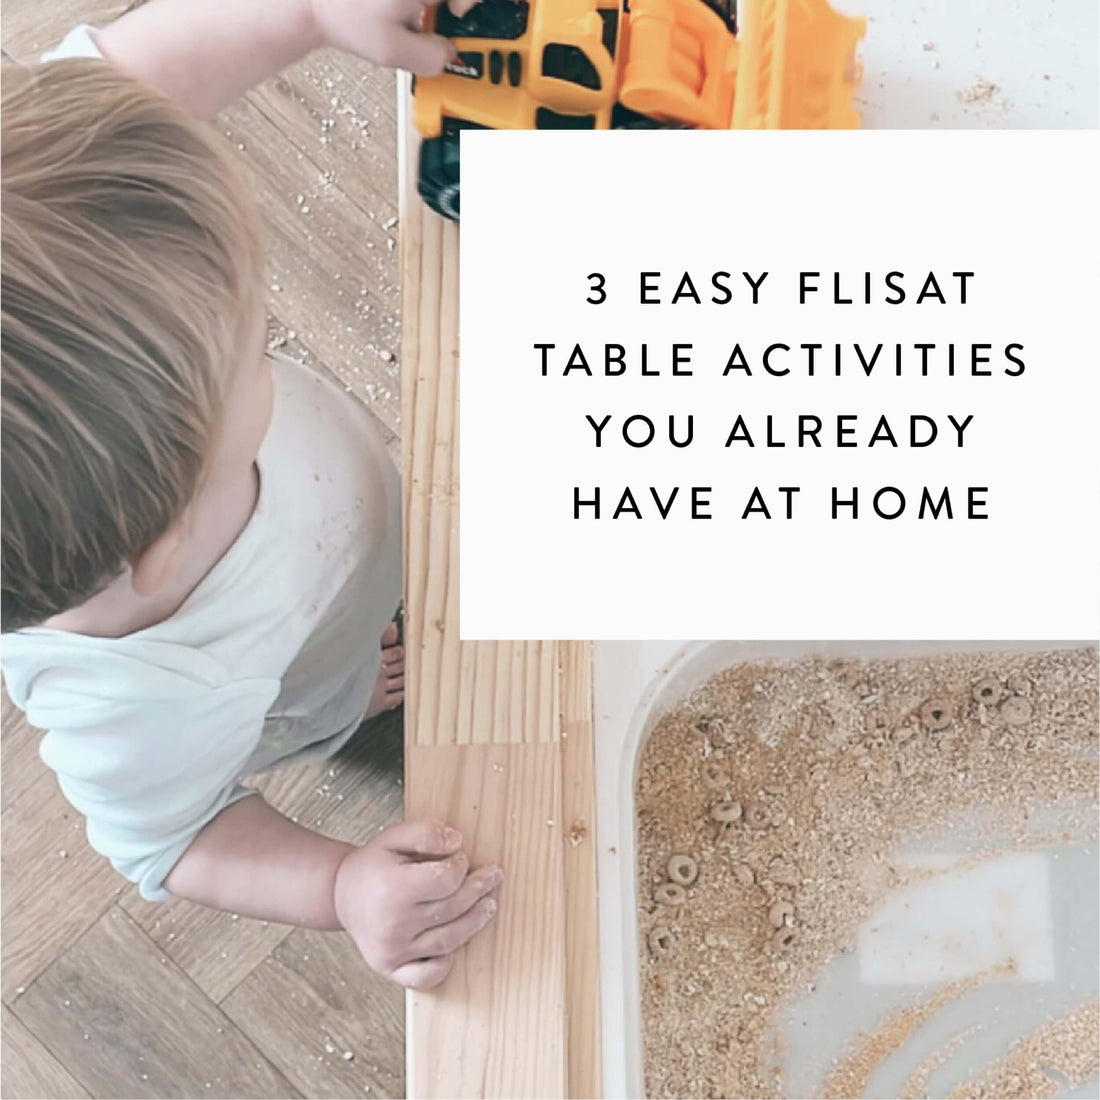 3 Easy activities with your IKEA flisat table